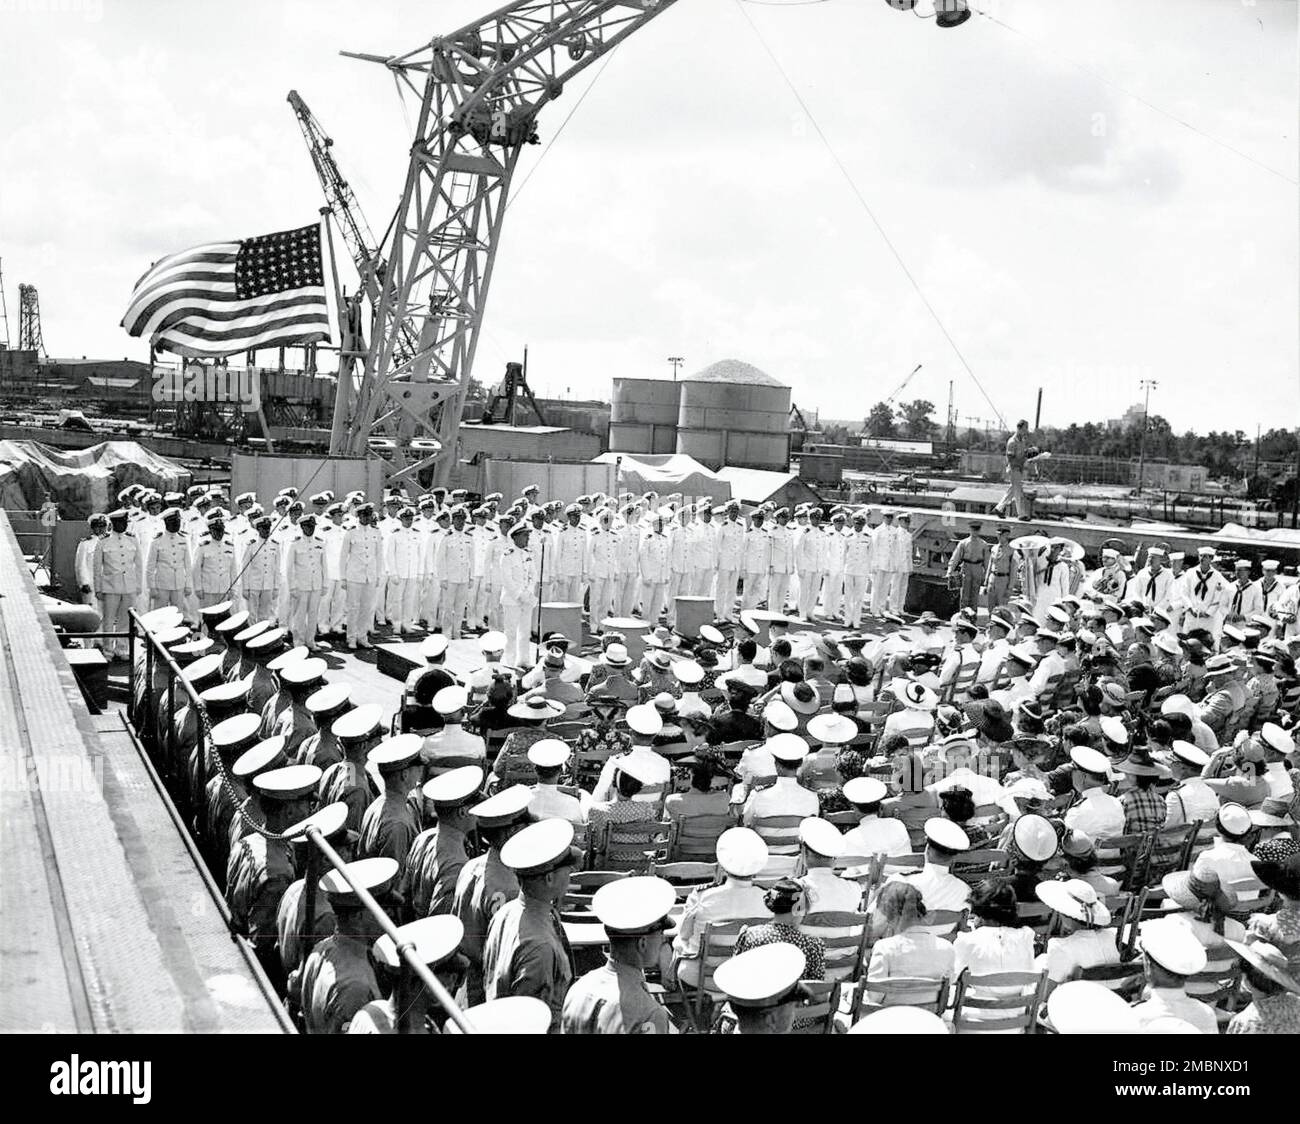 The USS Alabama's (BB-60) commissioning ceremony was held Aug. 16, 1942. Capt. George Wilson, Commanding Officer for the Alabama, provided the address and many were in attendance. Stock Photo